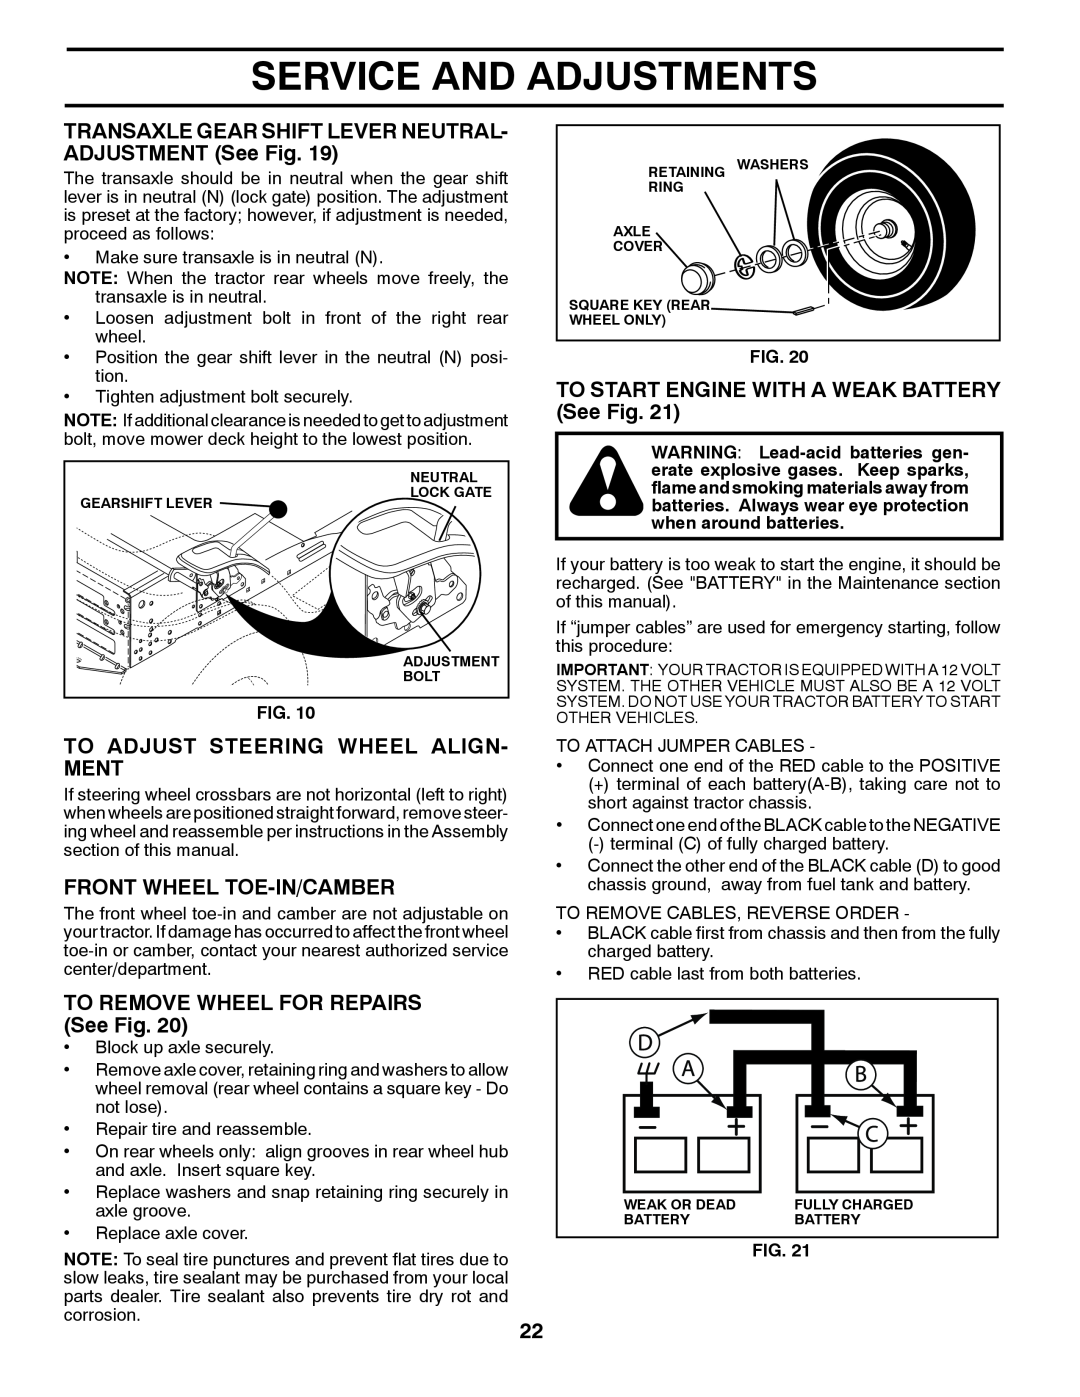 Poulan PO18542LT To Adjust Steering Wheel Align- Ment, Front Wheel Toe-In/Camber, TO REMOVE WHEEL FOR REPAIRS See Fig 